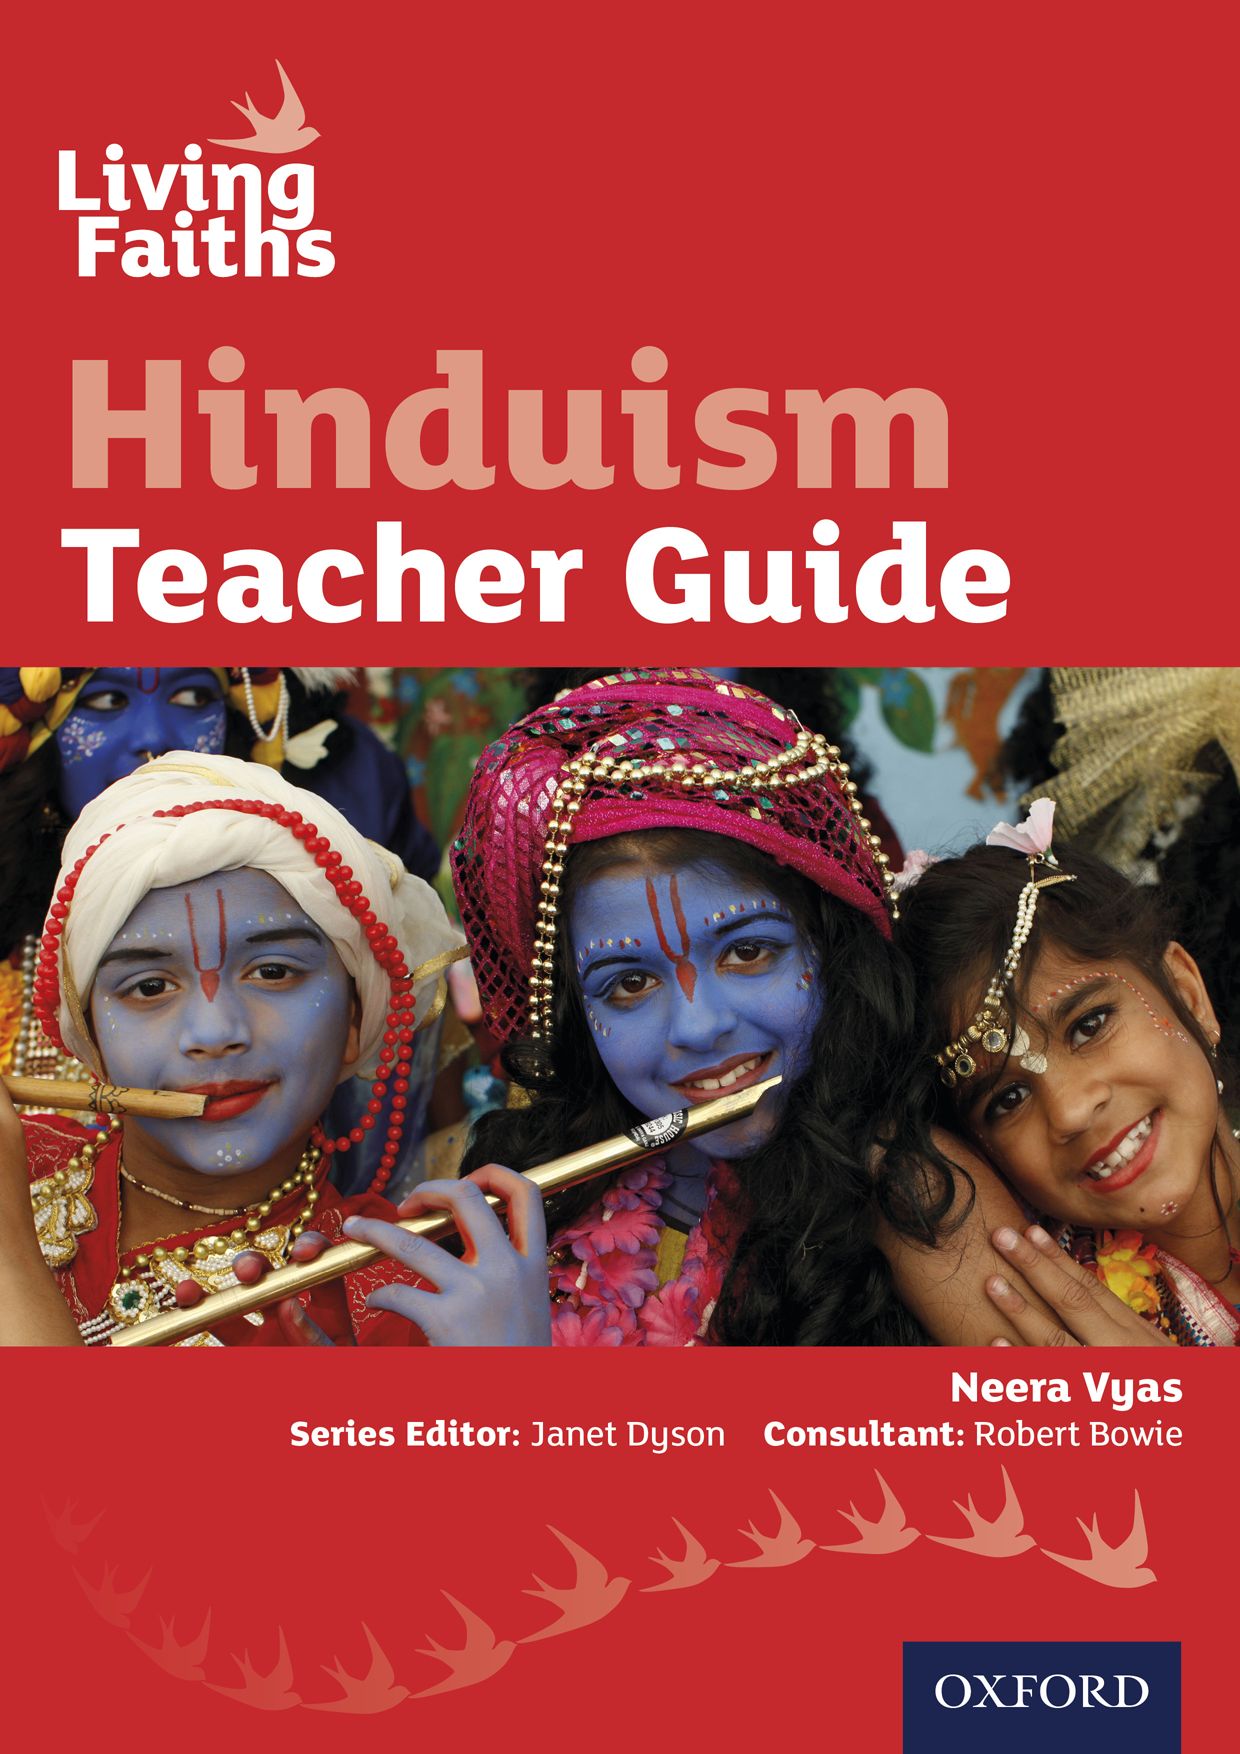 Featured image for “Living Faiths Hinduism Teacher Guide”